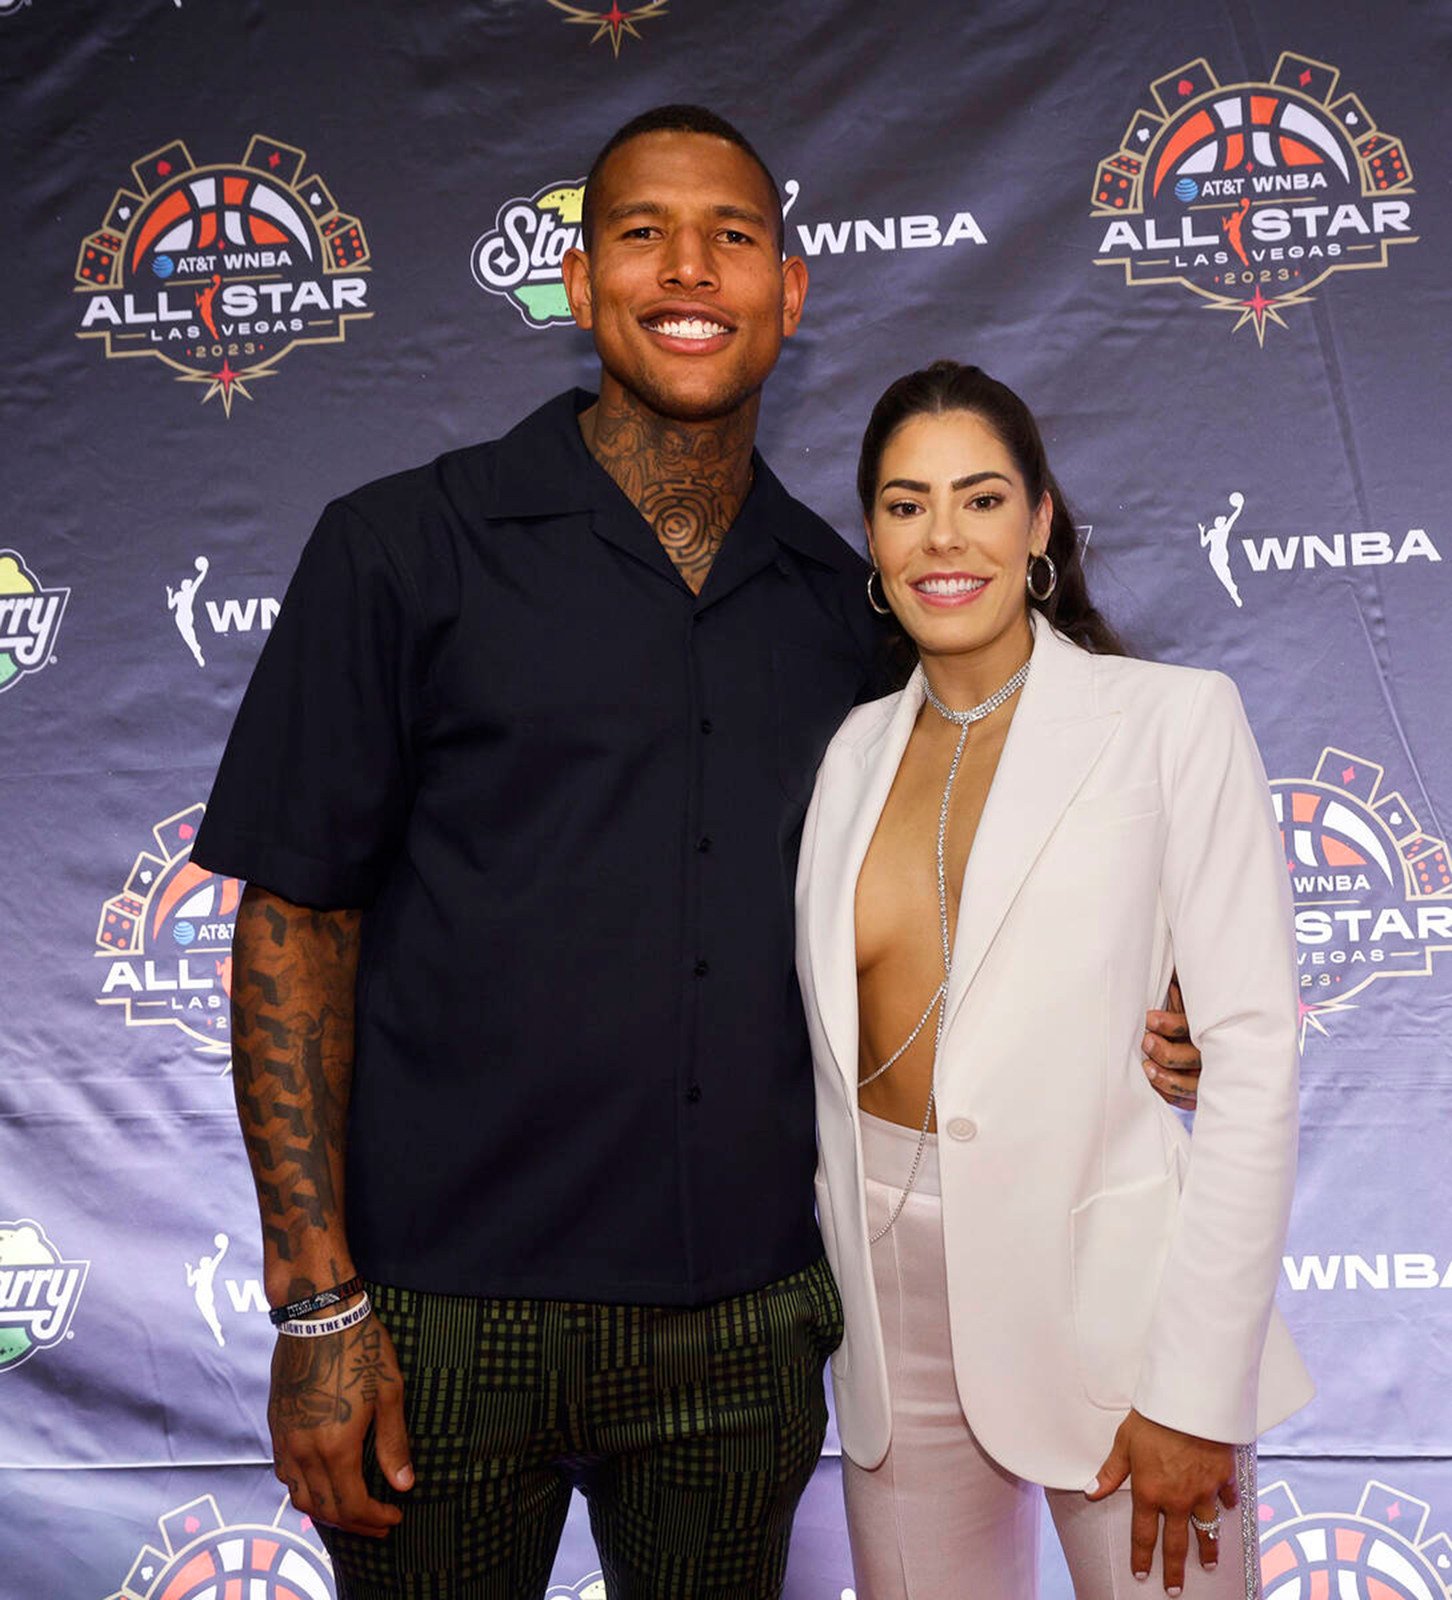 Kelsey Plum says she was left “devastated” after her split from NFL player Darren Waller earlier this year. Photo: Las Vegas Review-Journal/TNS